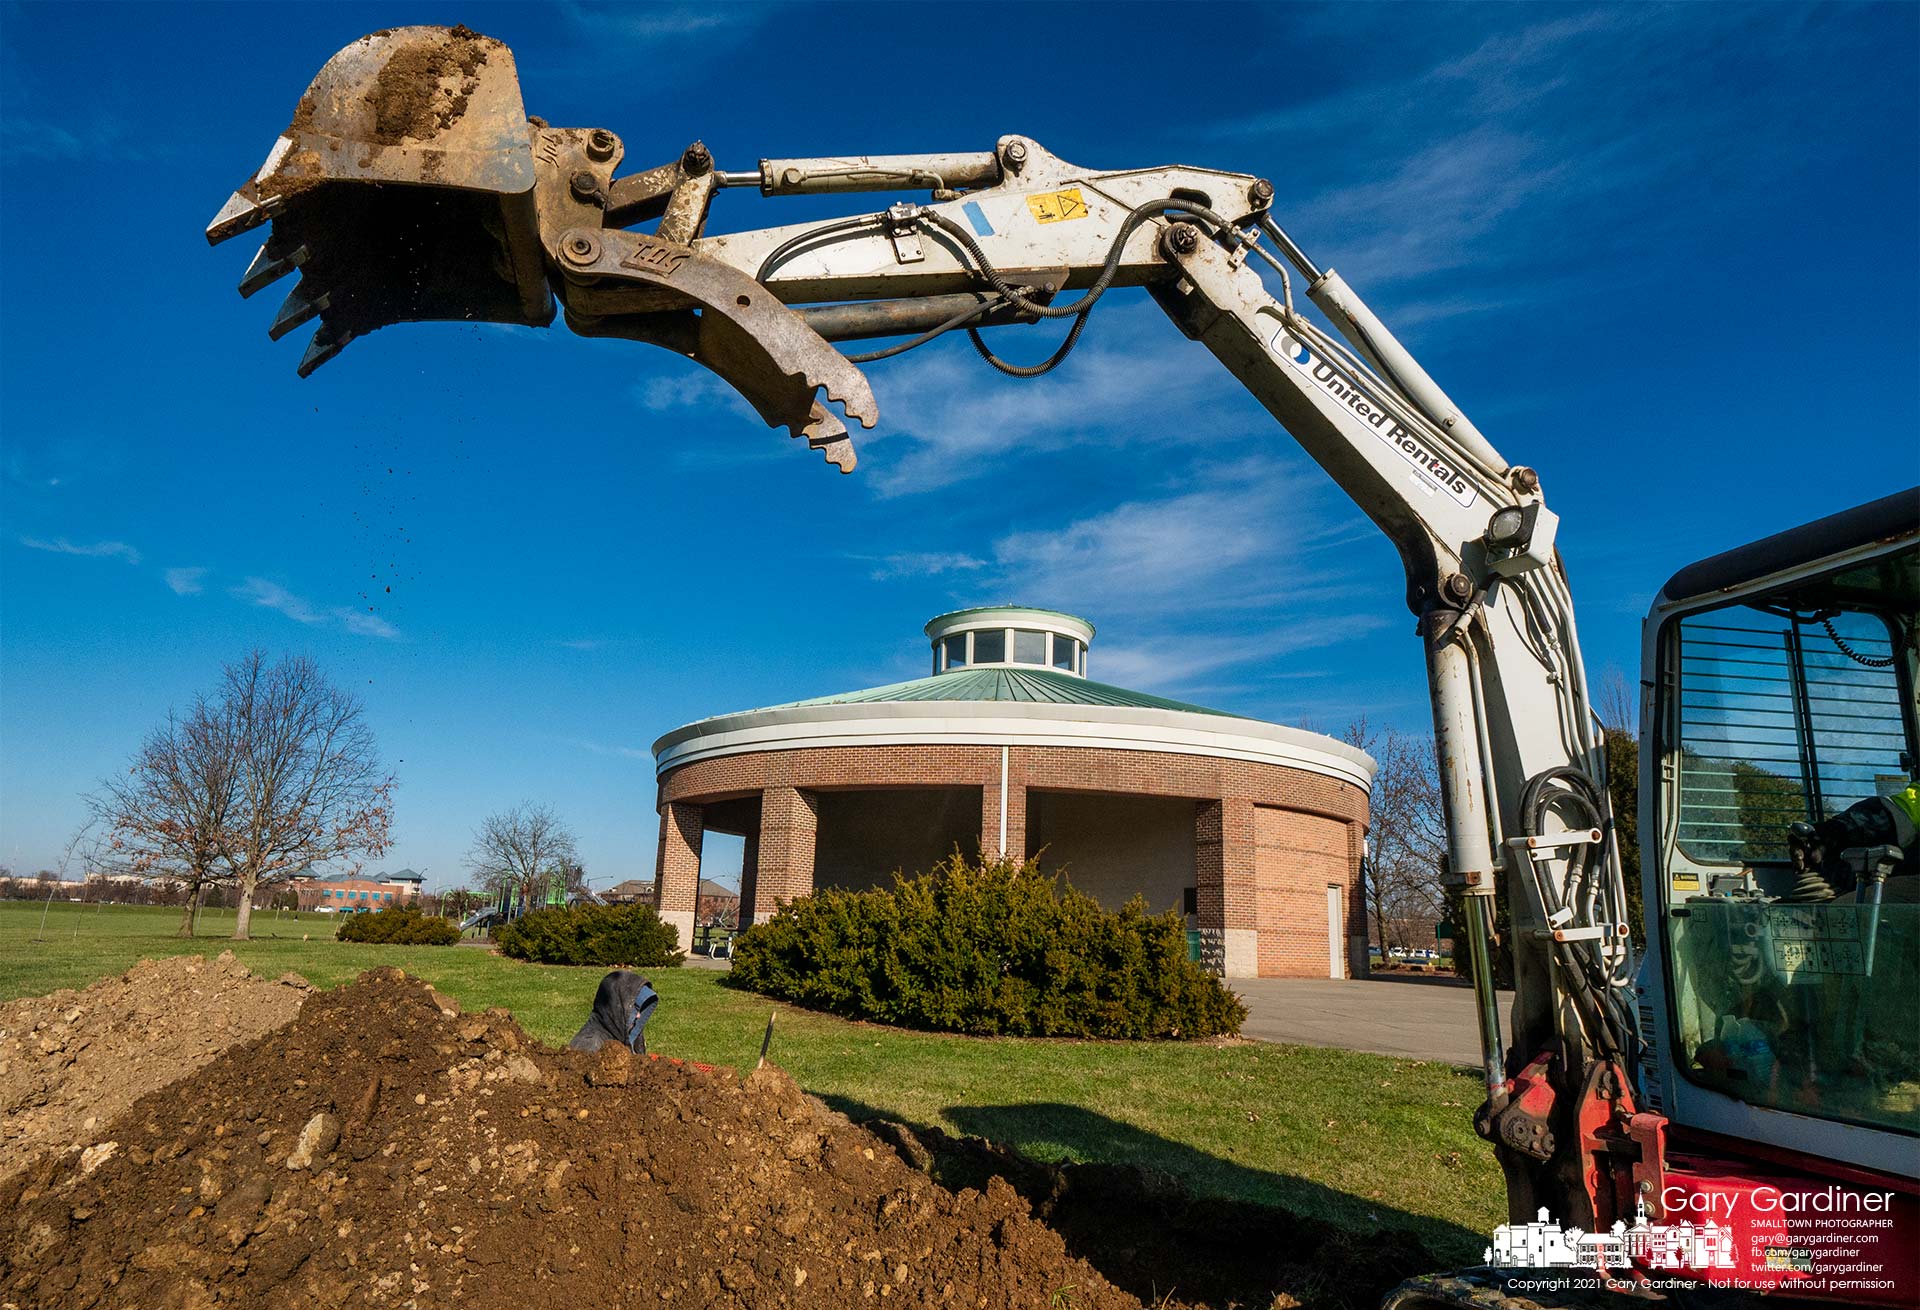 A construction crew excavates for conduits that will be used for the new veterans memorial being built at the sports field at the community center. My Final Photo for Dec. 21, 2021.